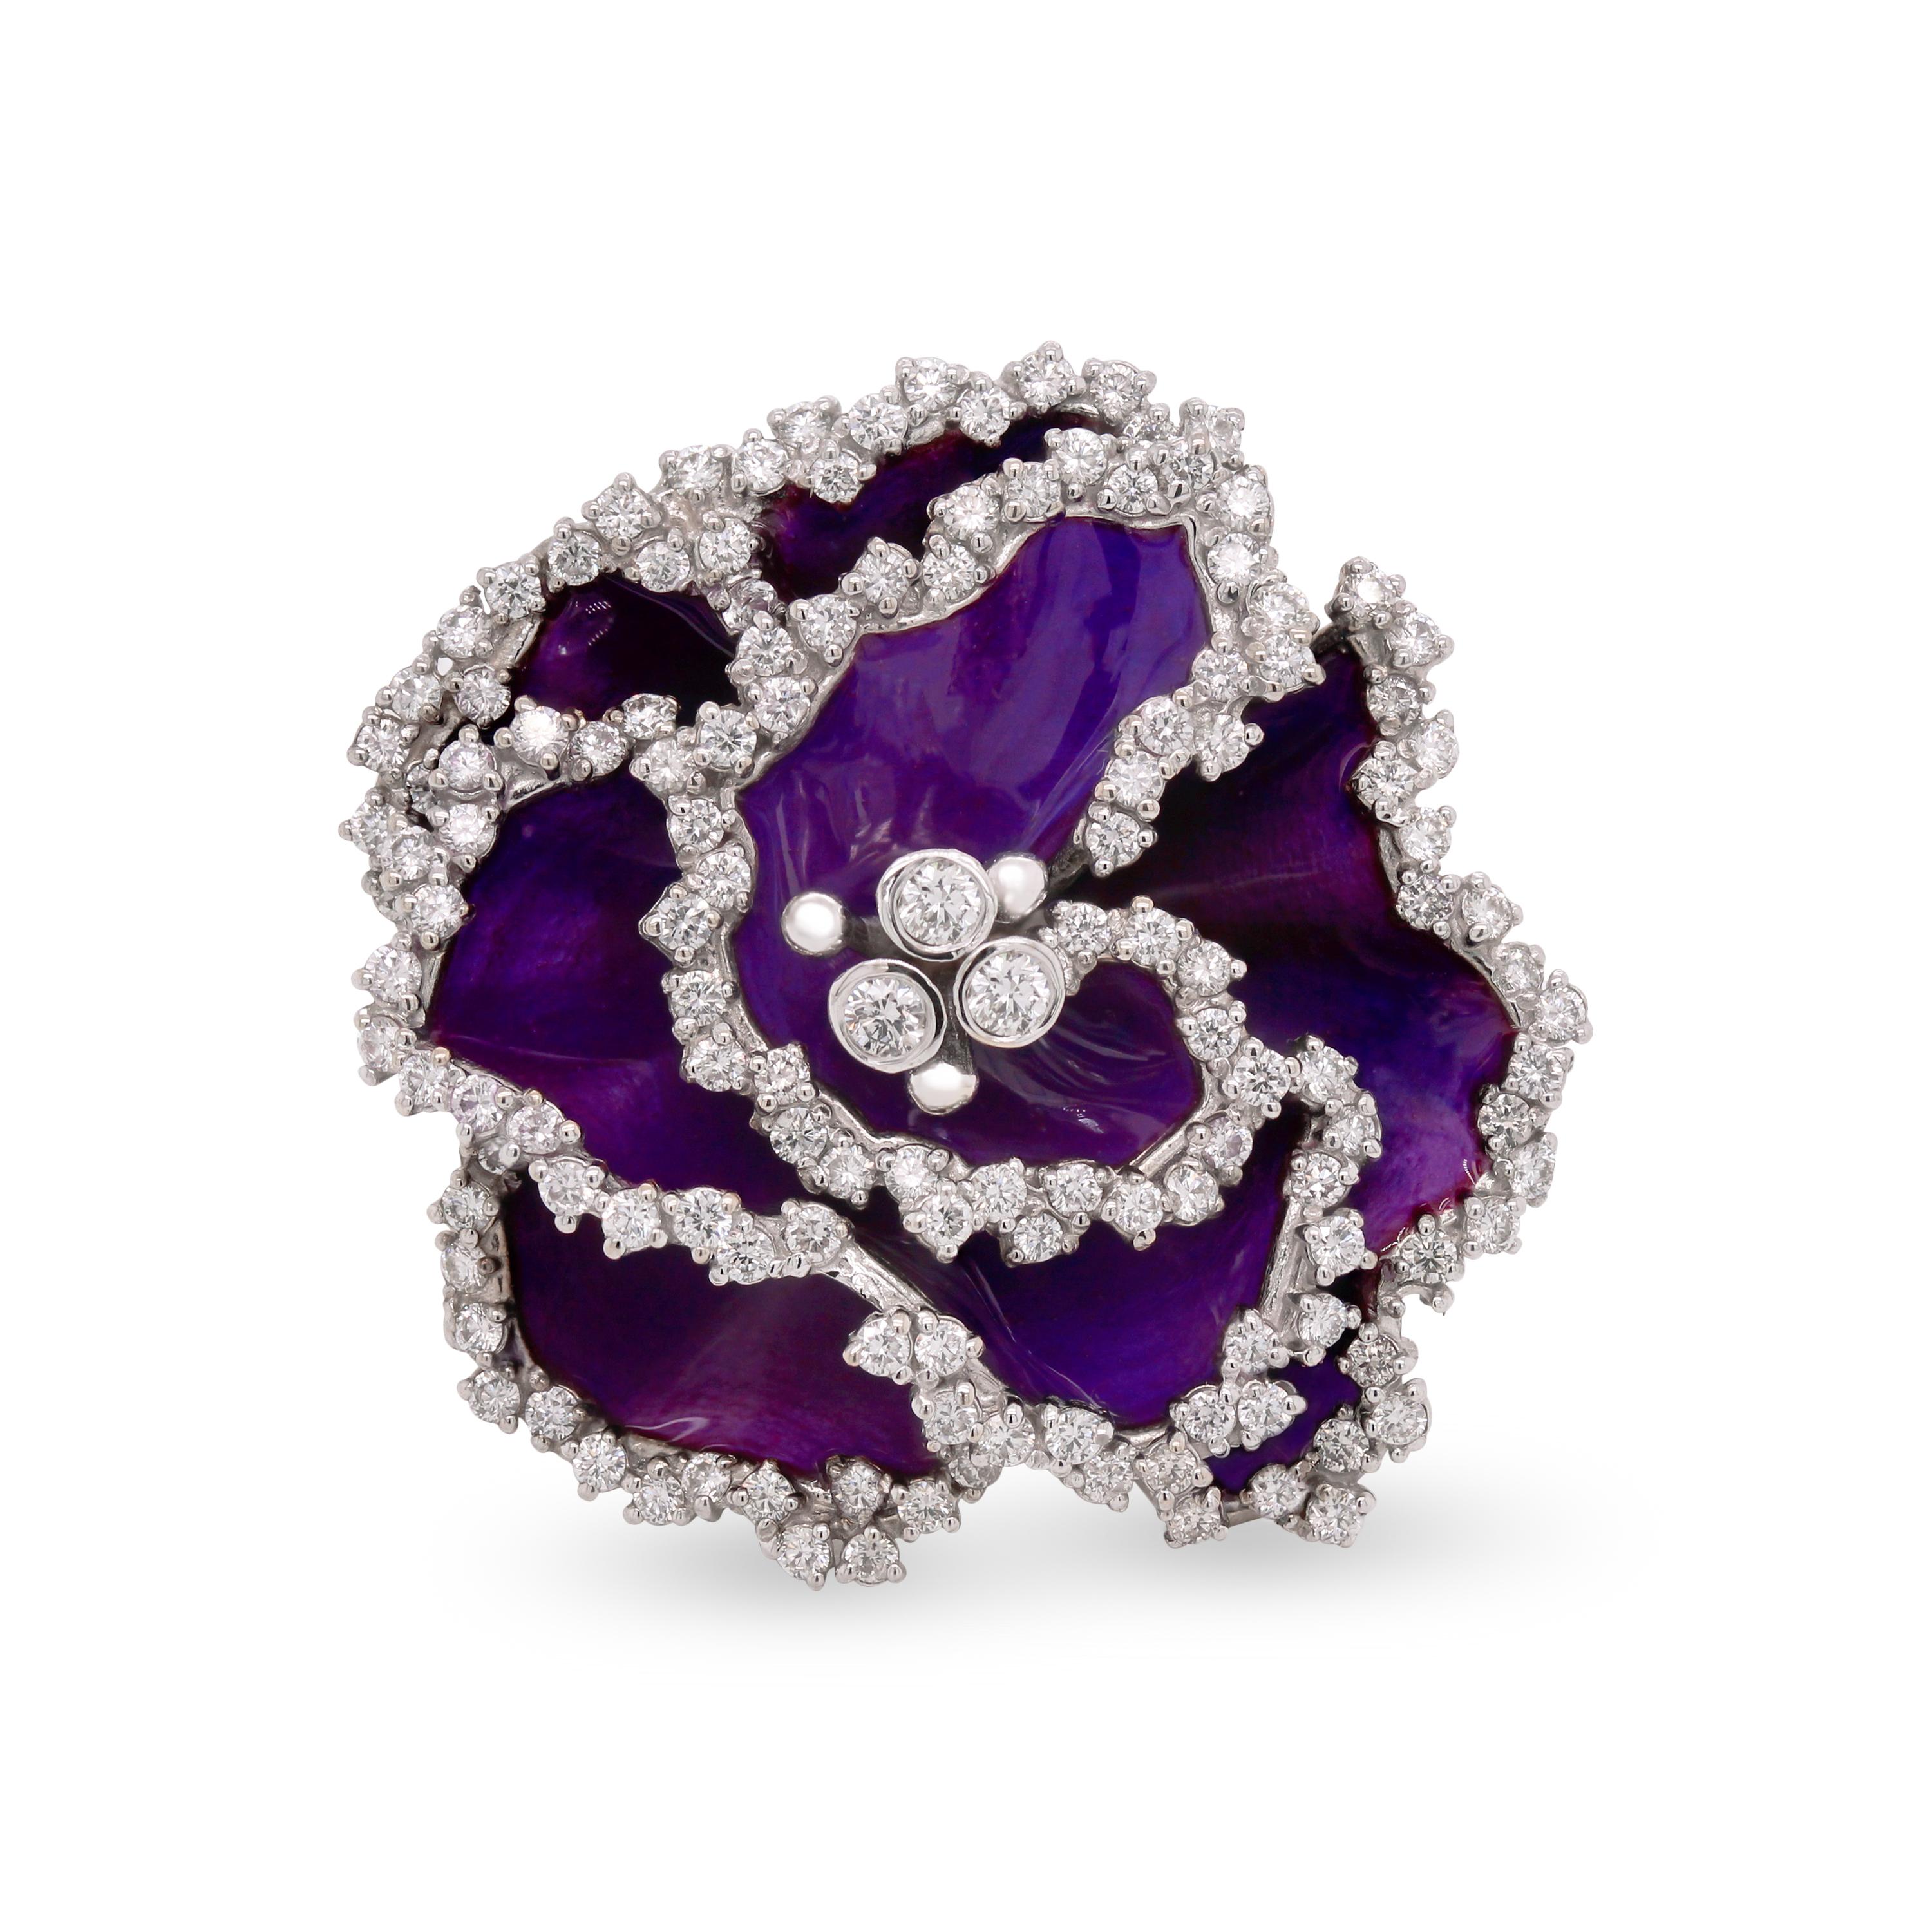 Stambolian 18 Karat White Gold Diamond Purple Enamel Africa Violet Floral Ring

This state-of-the-art ring by Stambolian from the Spring 2021 collection features a purple enamel finishing with diamonds set all throughout.

1.47 carat G color, VS